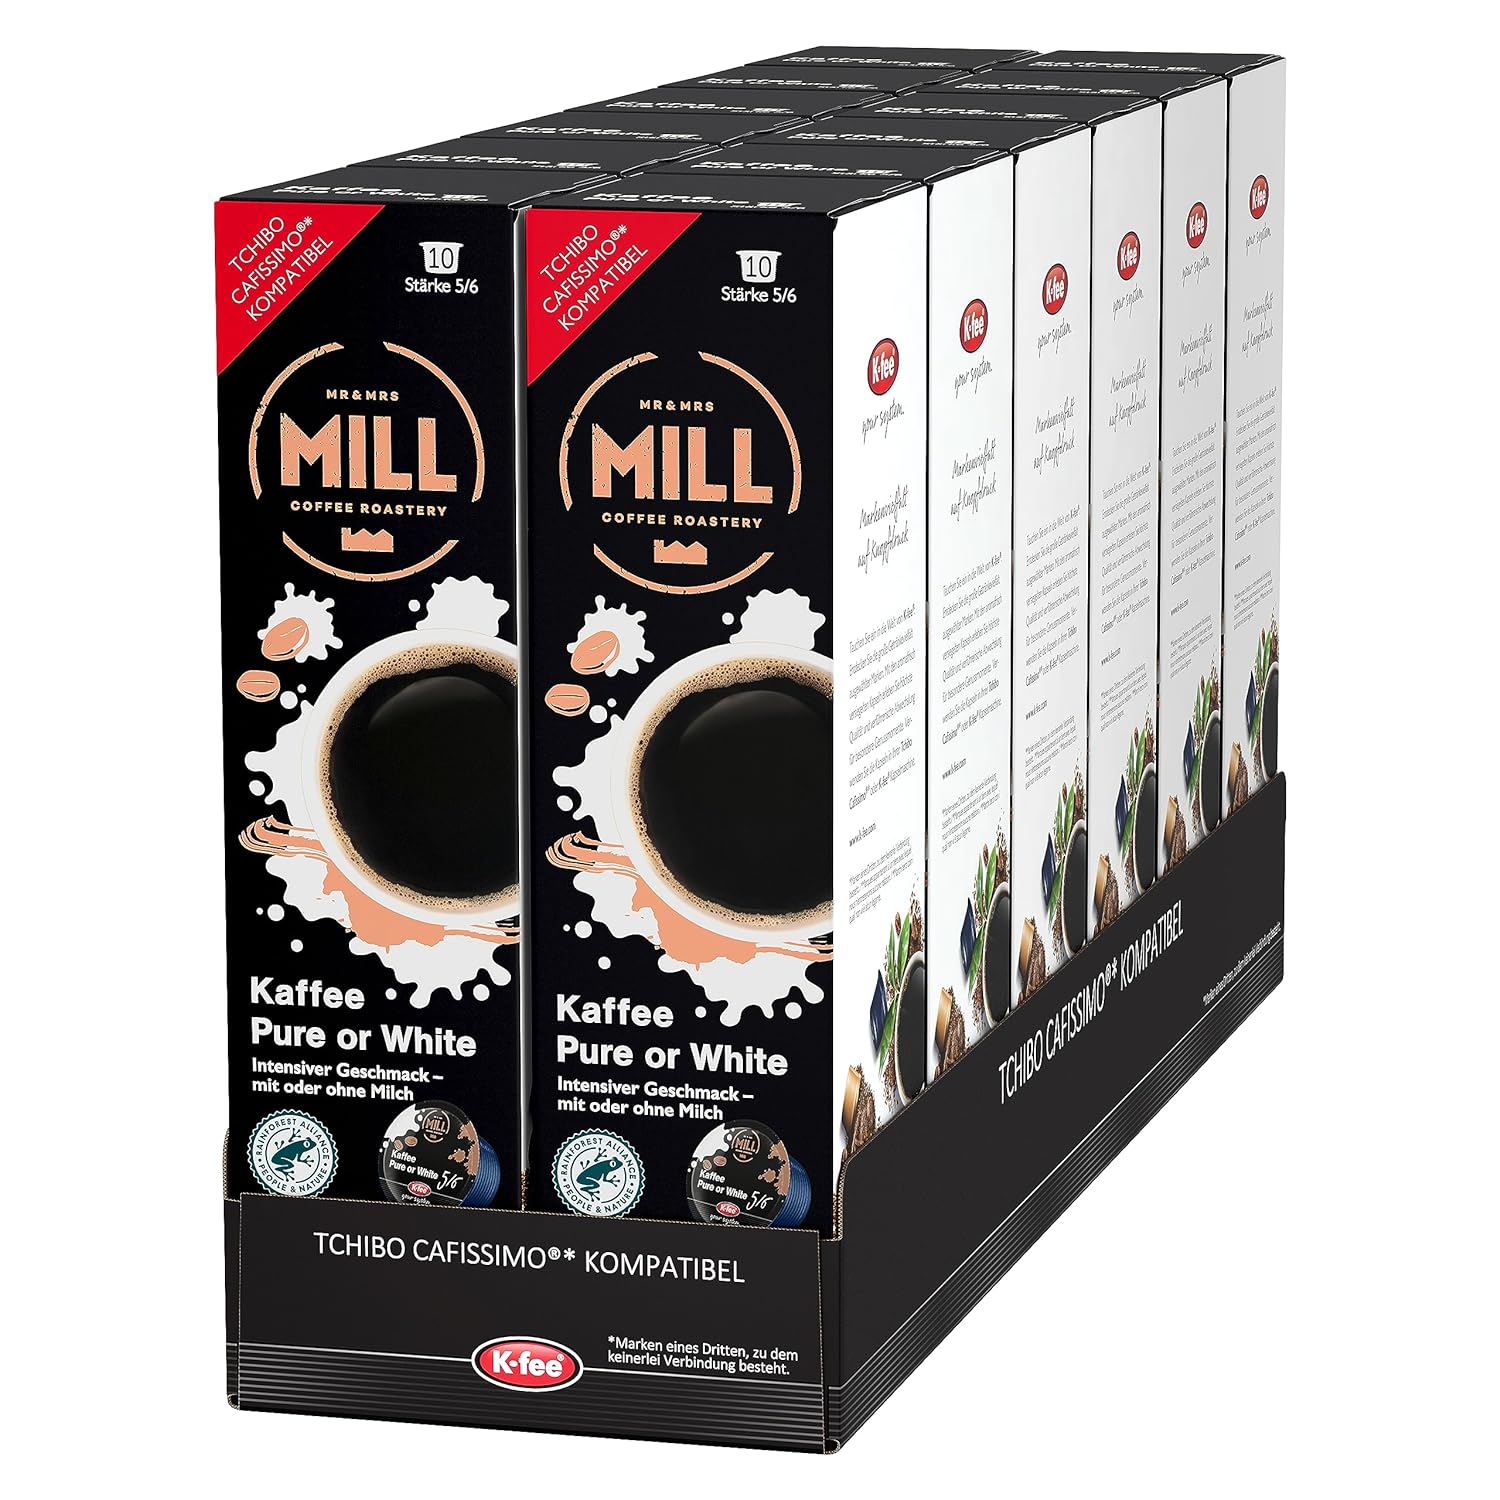 Mr & Mrs Mill Coffee Capsules Pure or White, Filter Coffee, Strength 5/6, Compatible with K-fee & Tchibo Cafissimo*, UTZ Certified, 120 Capsules (12 x 10)